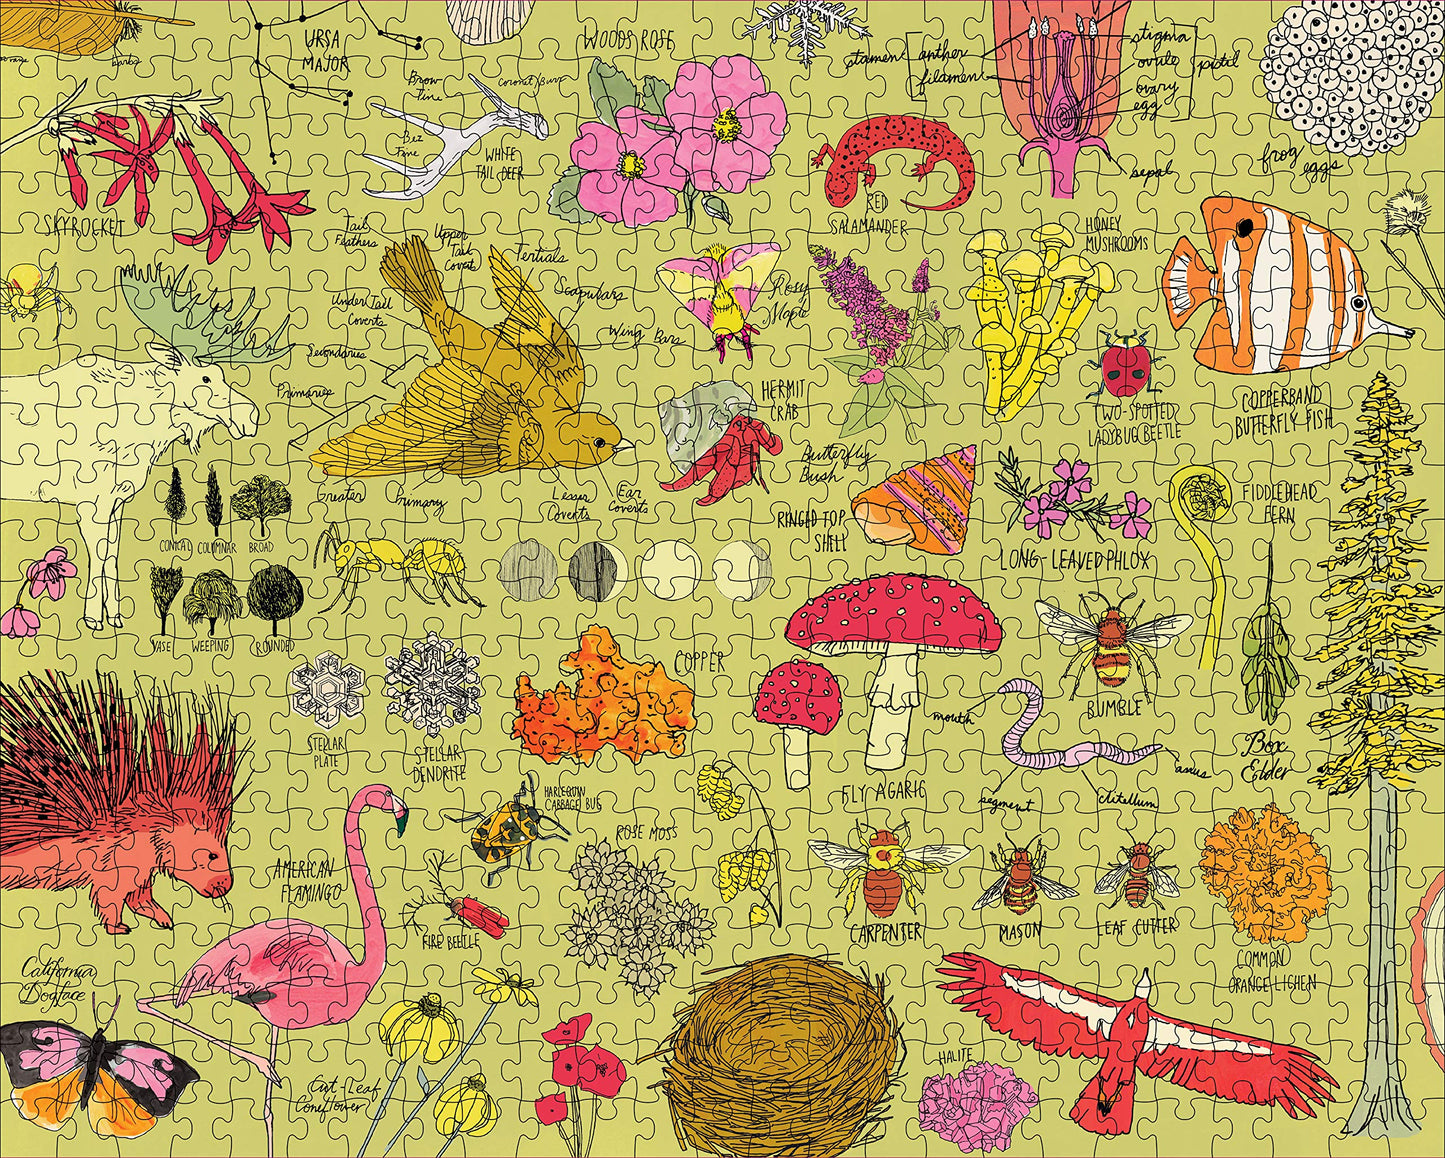 Nature Anatomy: The Puzzle (500 pieces)